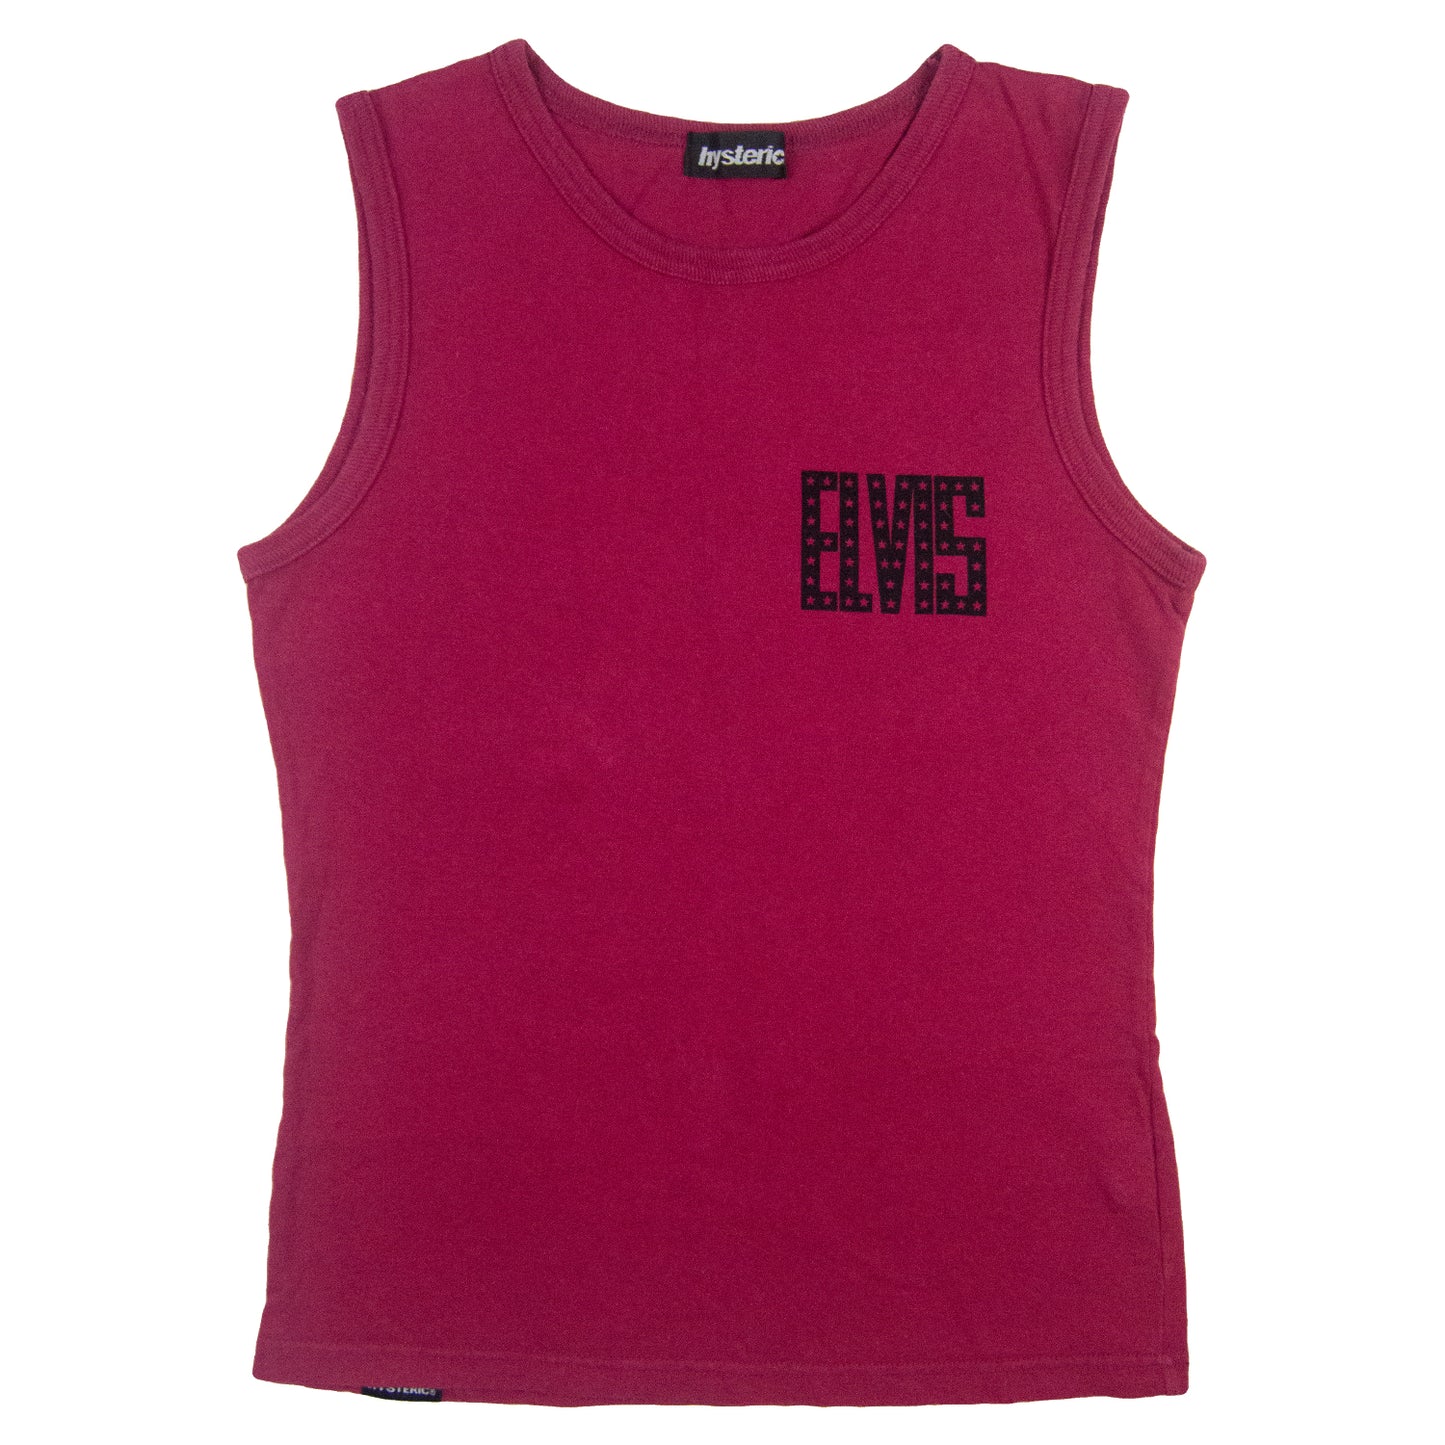 Hysteric Glamour Elvis King Of Rock Tank Top